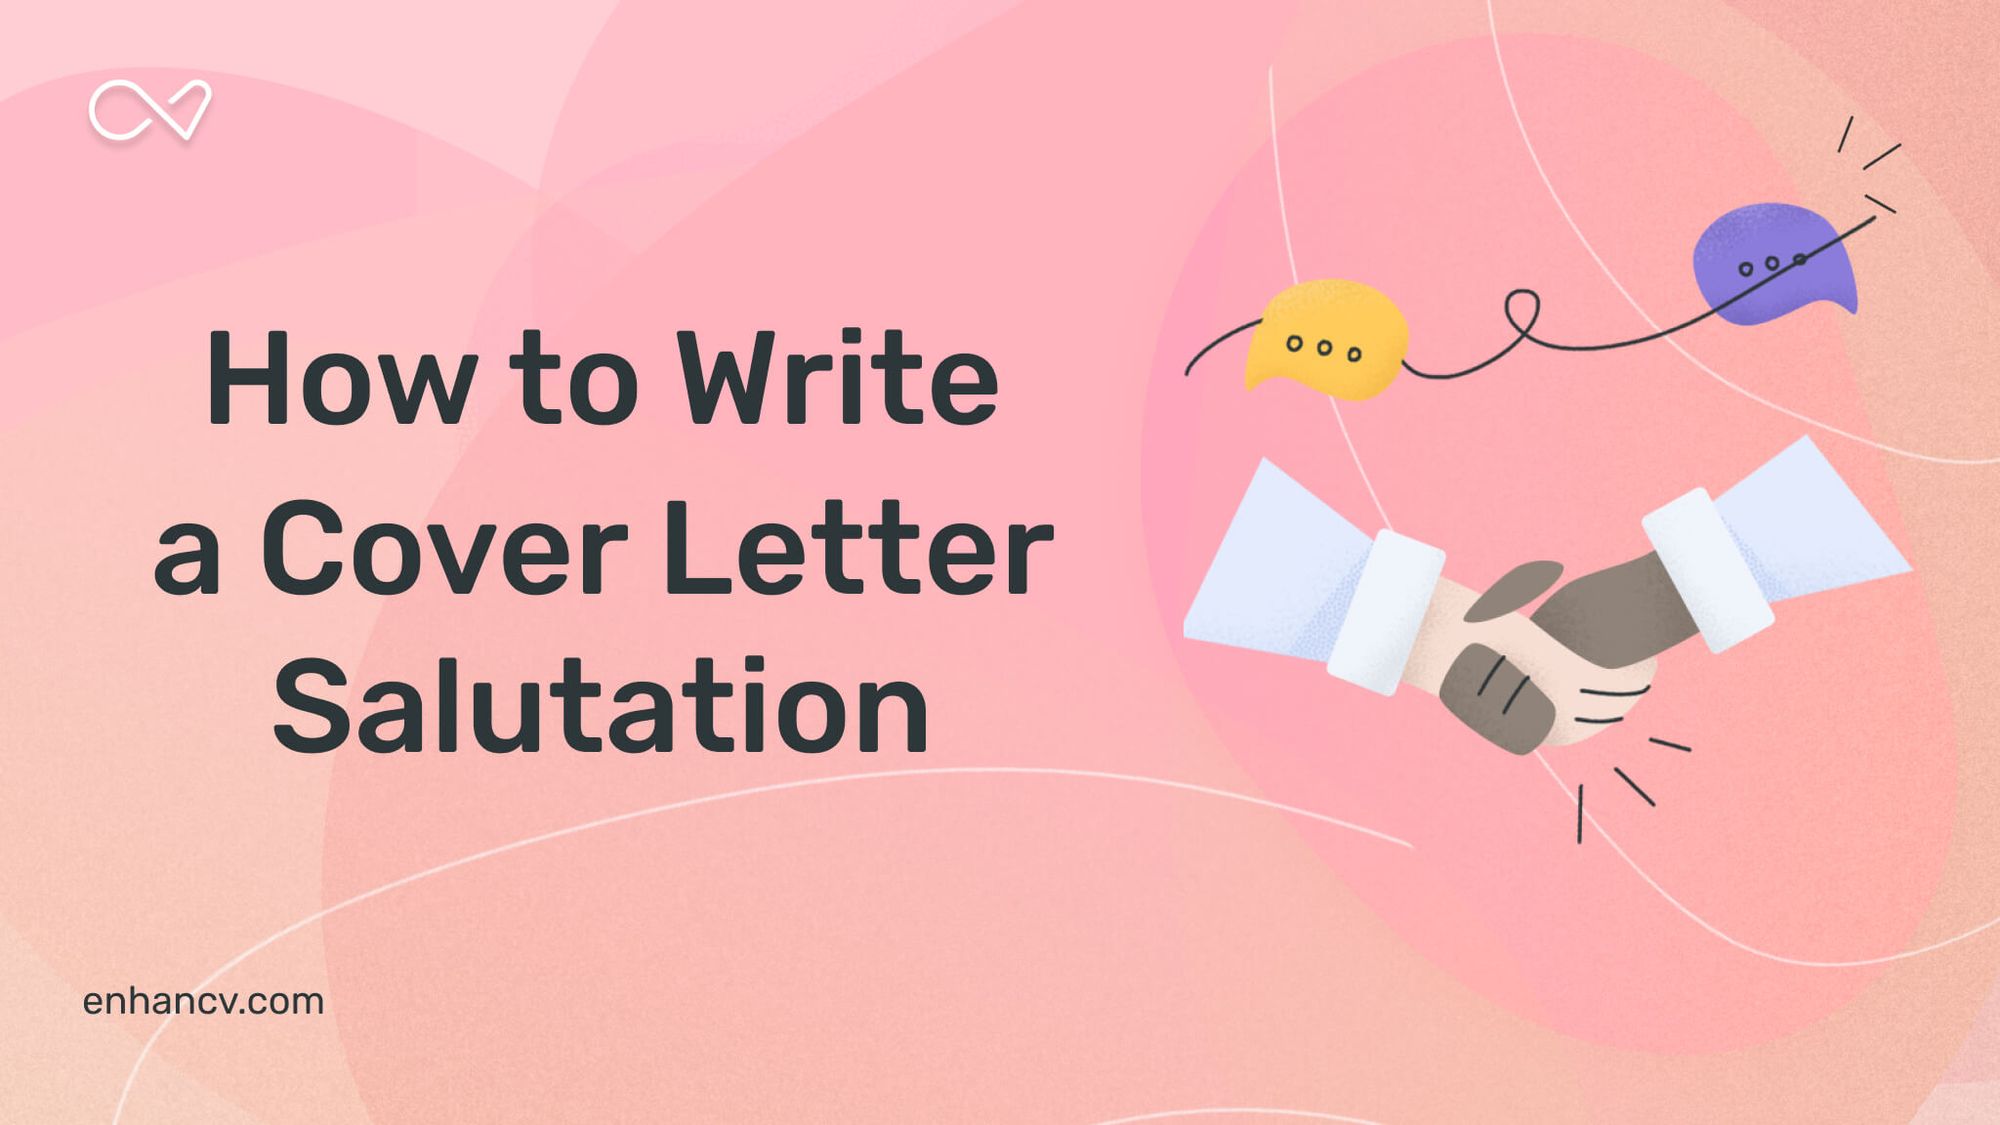 Cover Letter Salutation That Entices the Recruiter to Learn More About You